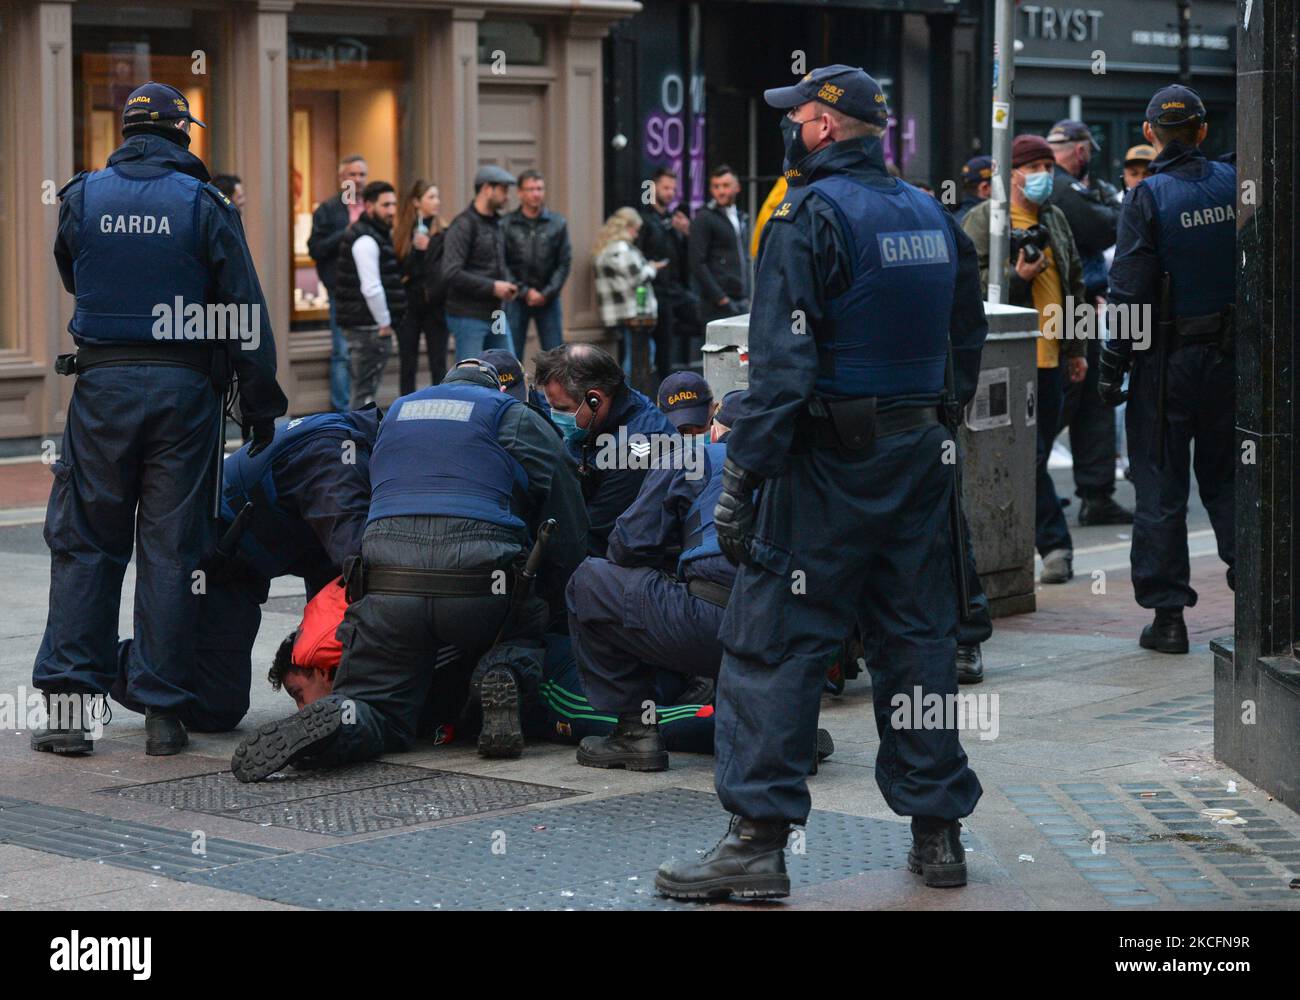 Members of Gardai surround a young man on Grafton Street in Dublin, on Saturday evening, June 5, 2021. Nineteen people were arrested on suspicion of violating public order after another night of rioting in downtown Dublin. Glass bottles and other missiles were thrown at the gardai after they collided with large crowds in the city on Saturday night. On Sunday, 6 June 2021, in Dublin, Ireland. (Photo by Artur Widak/NurPhoto) Stock Photo